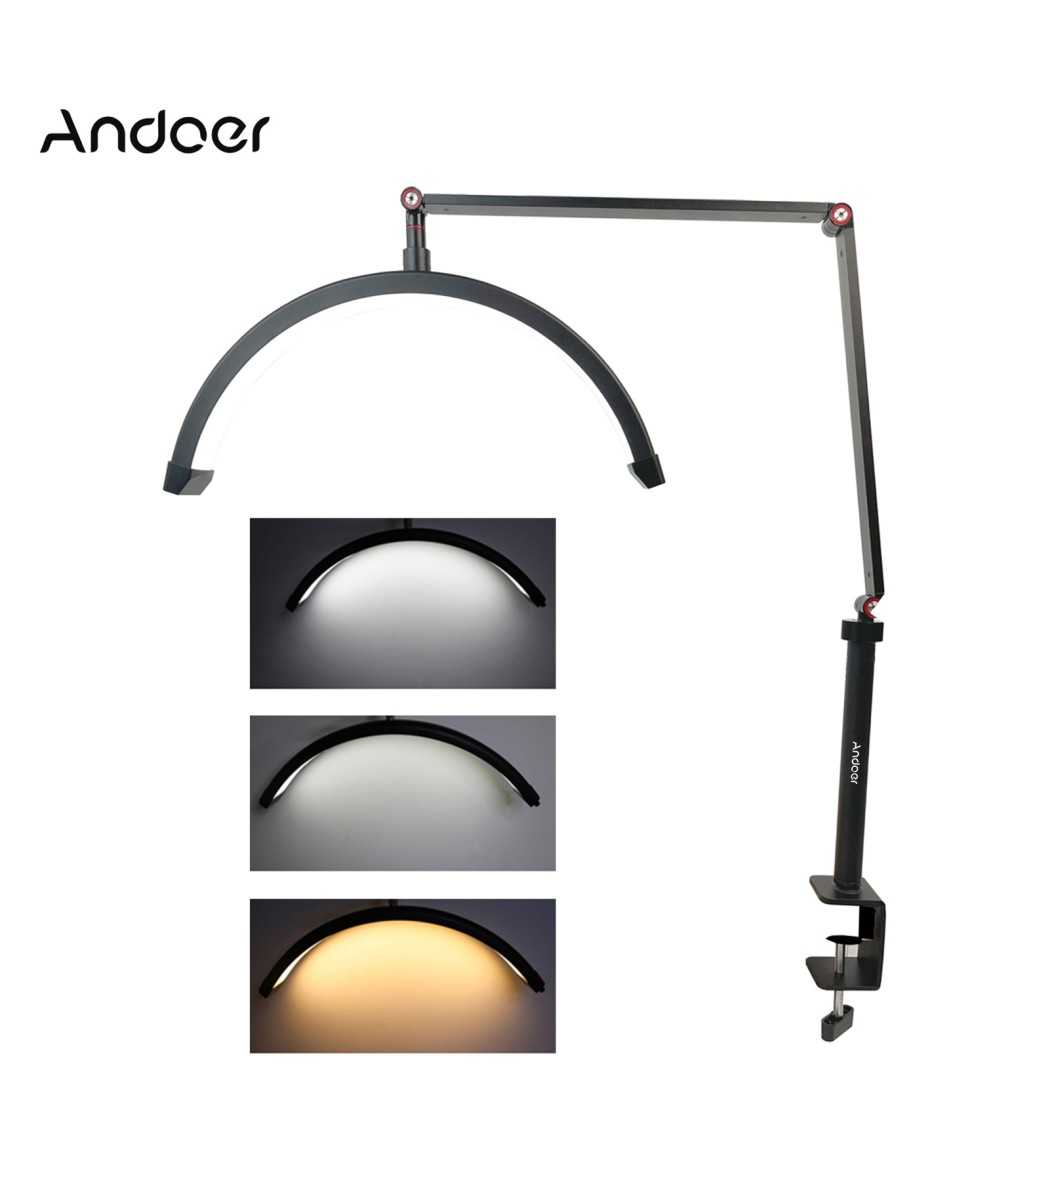 HD-M3X Desktop LED Video Light Half-moon Shaped Fill Light Dimmable with C-Clamp Desk Mount